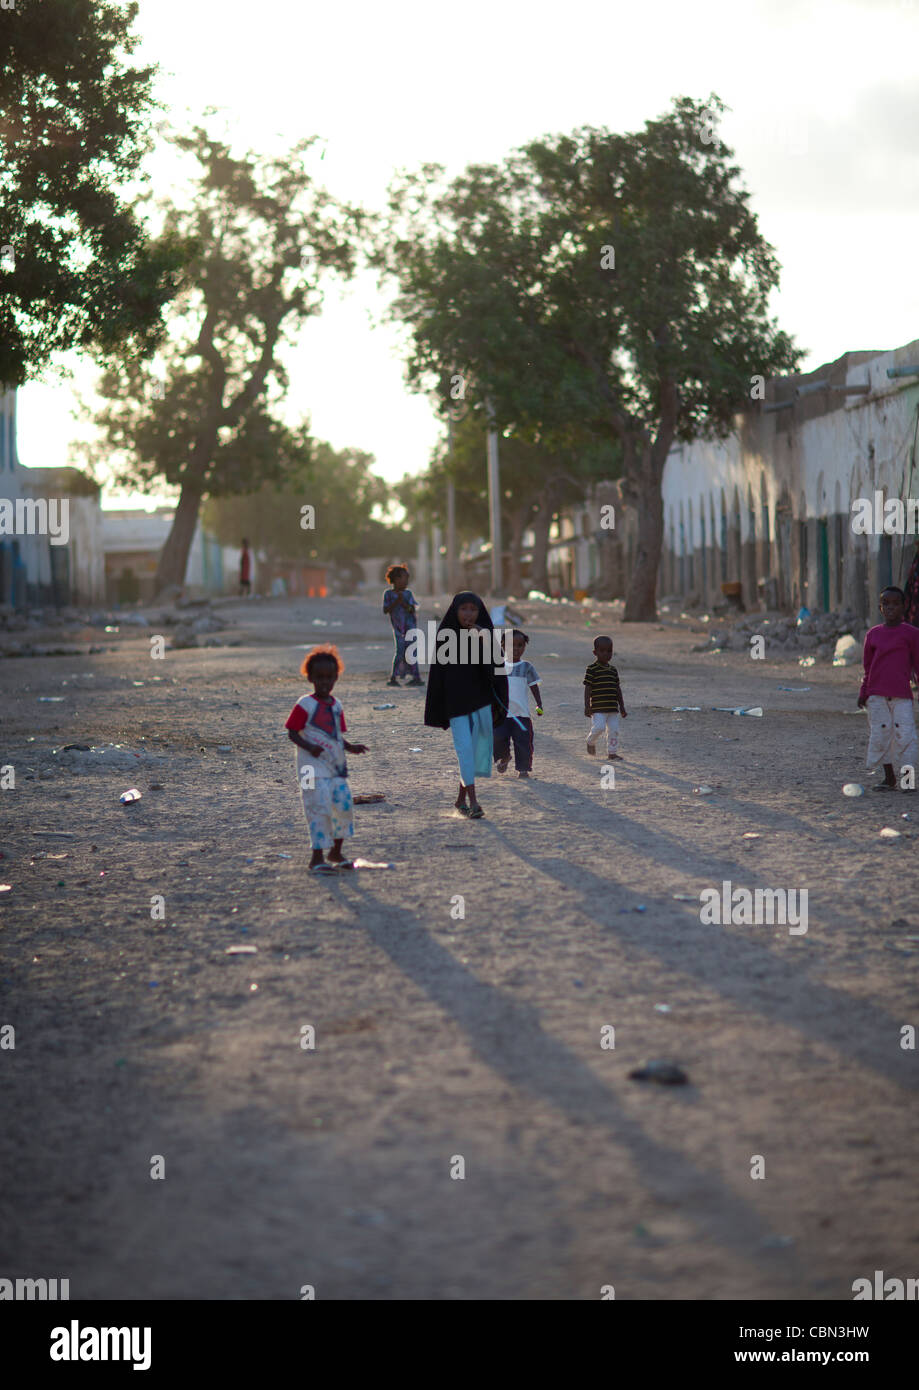 Children Playing In A Clay Ground Street At End Of Day, Berbera Somaliland Stock Photo